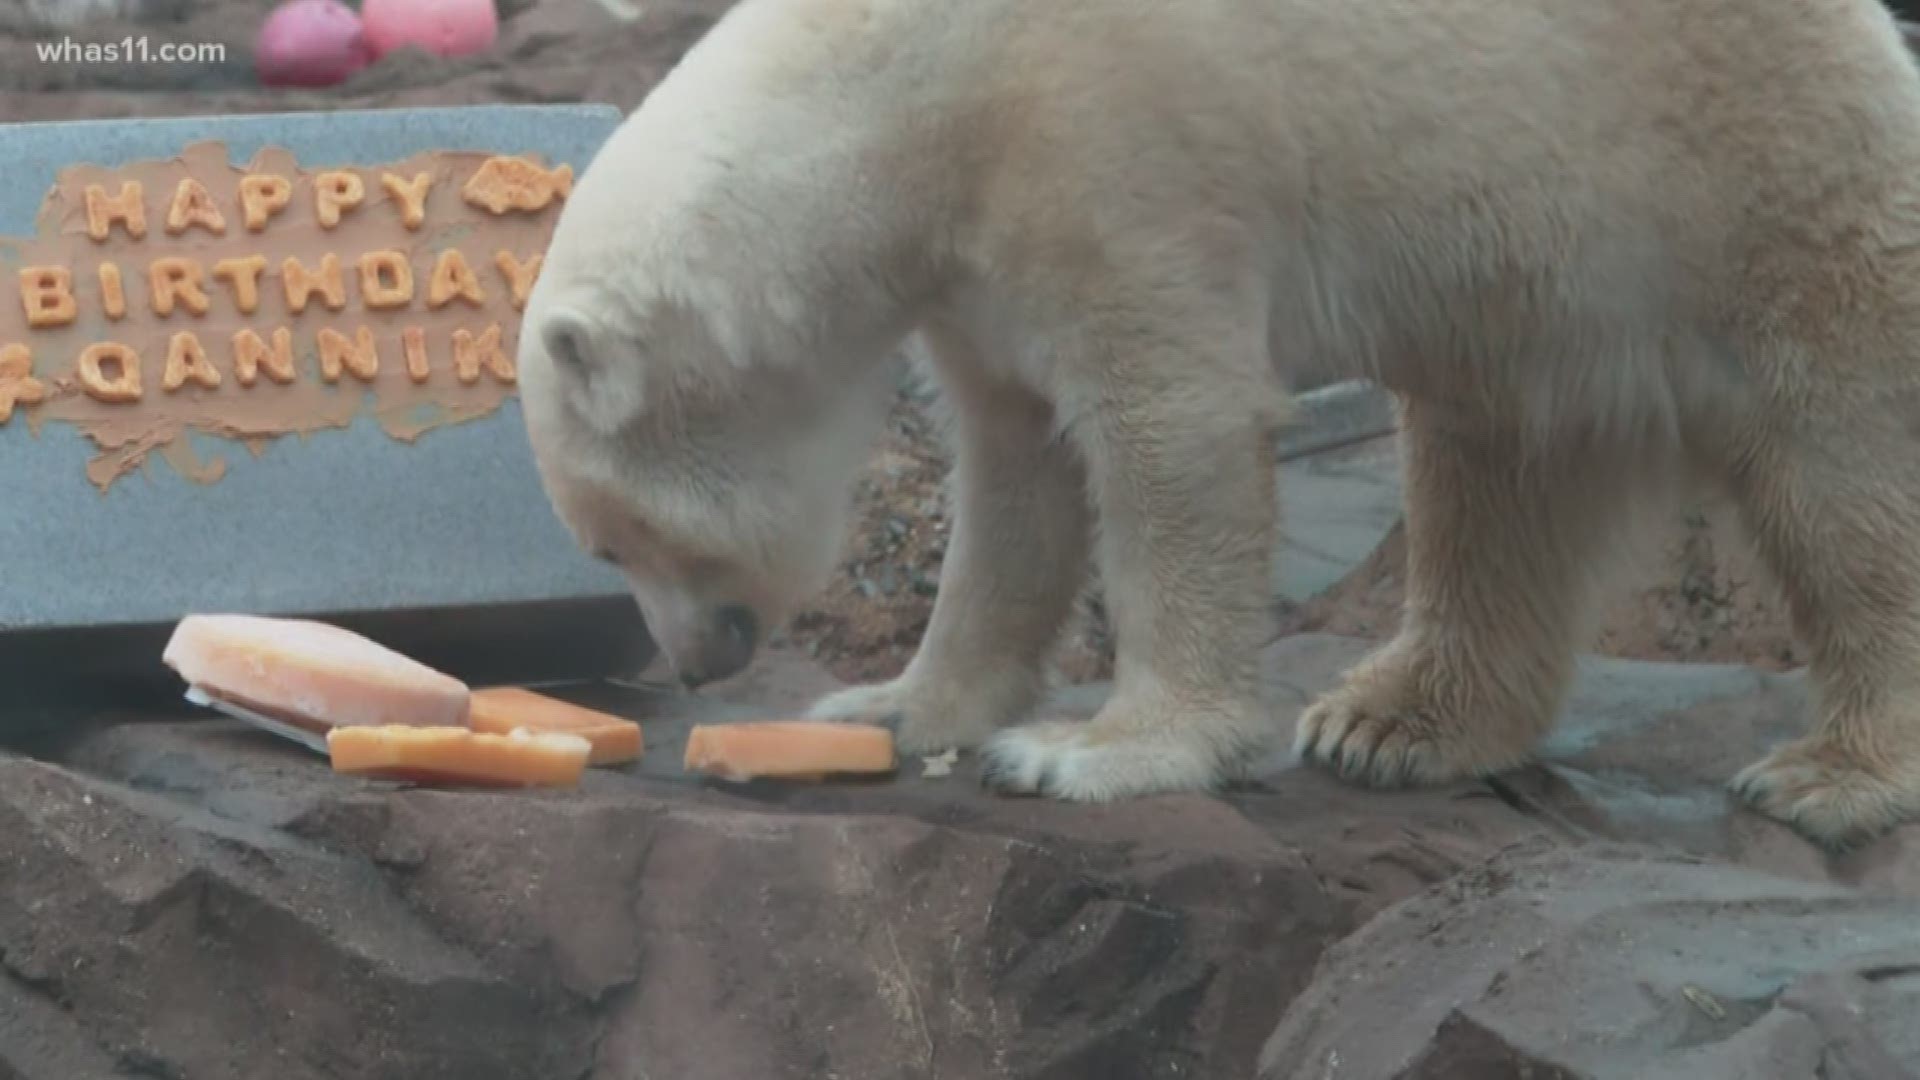 Some of the zoo's favorite animals celebrated their birthdays Saturday.